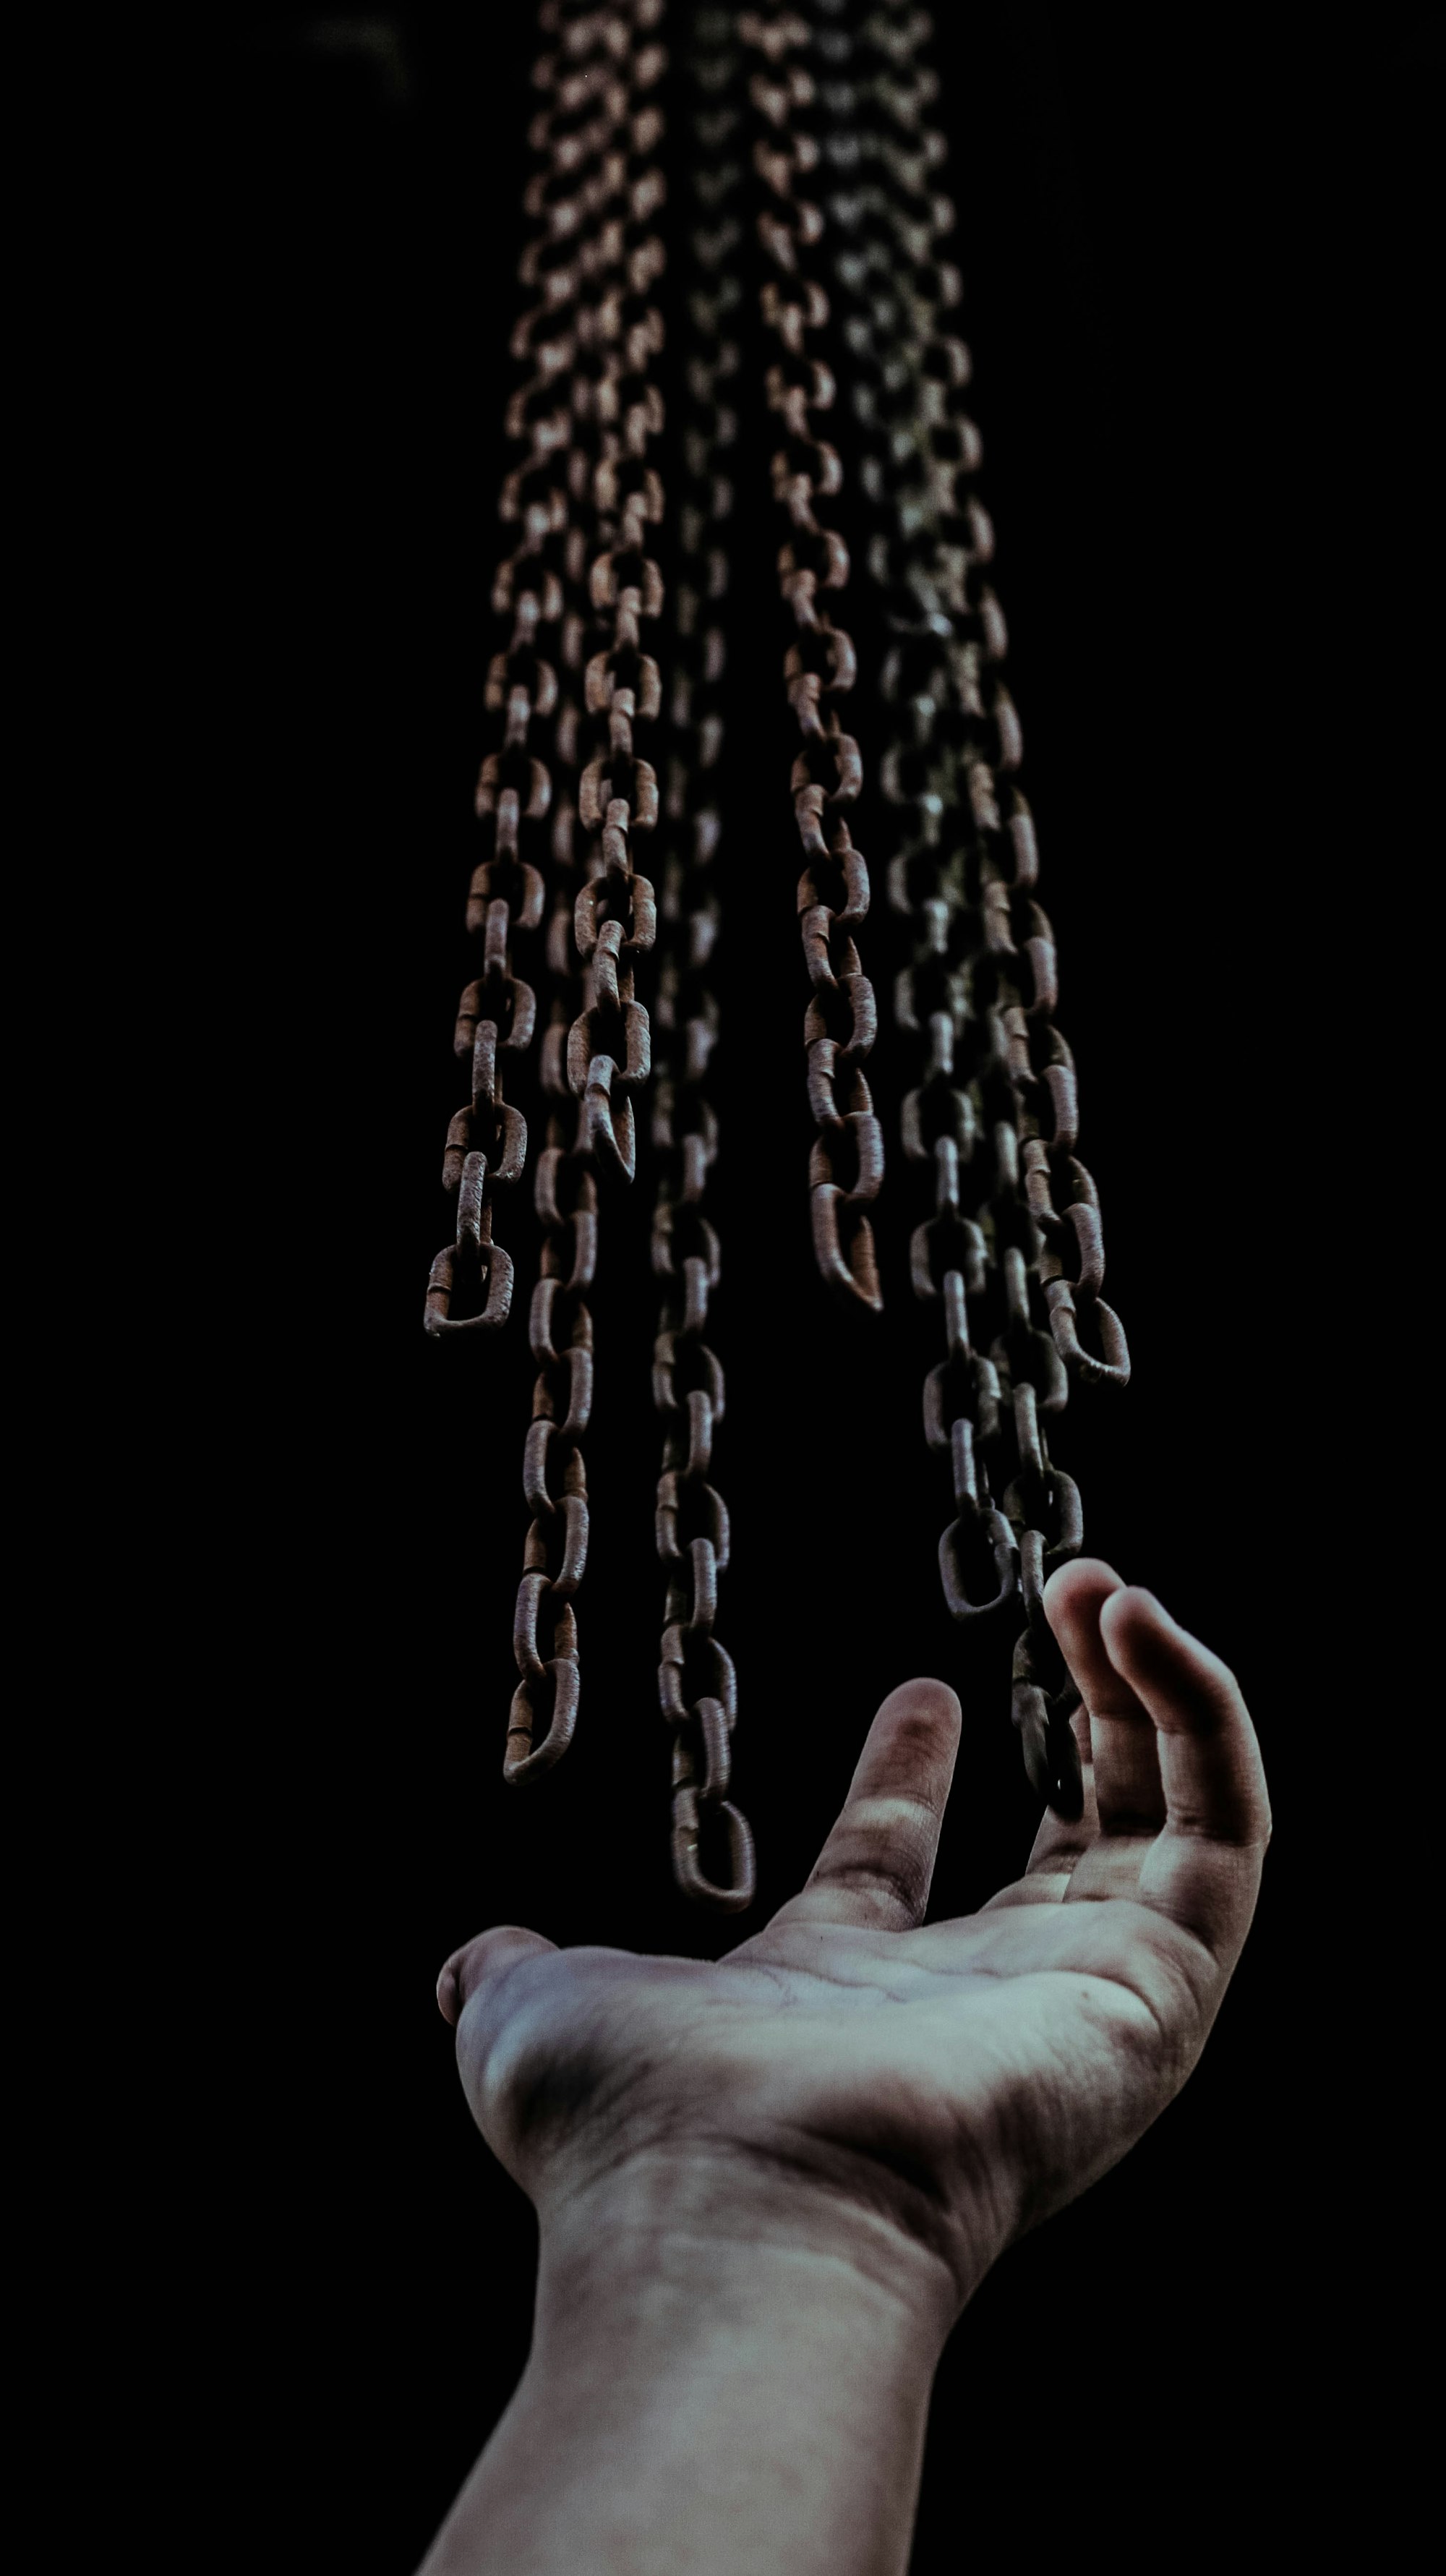 Life in chains